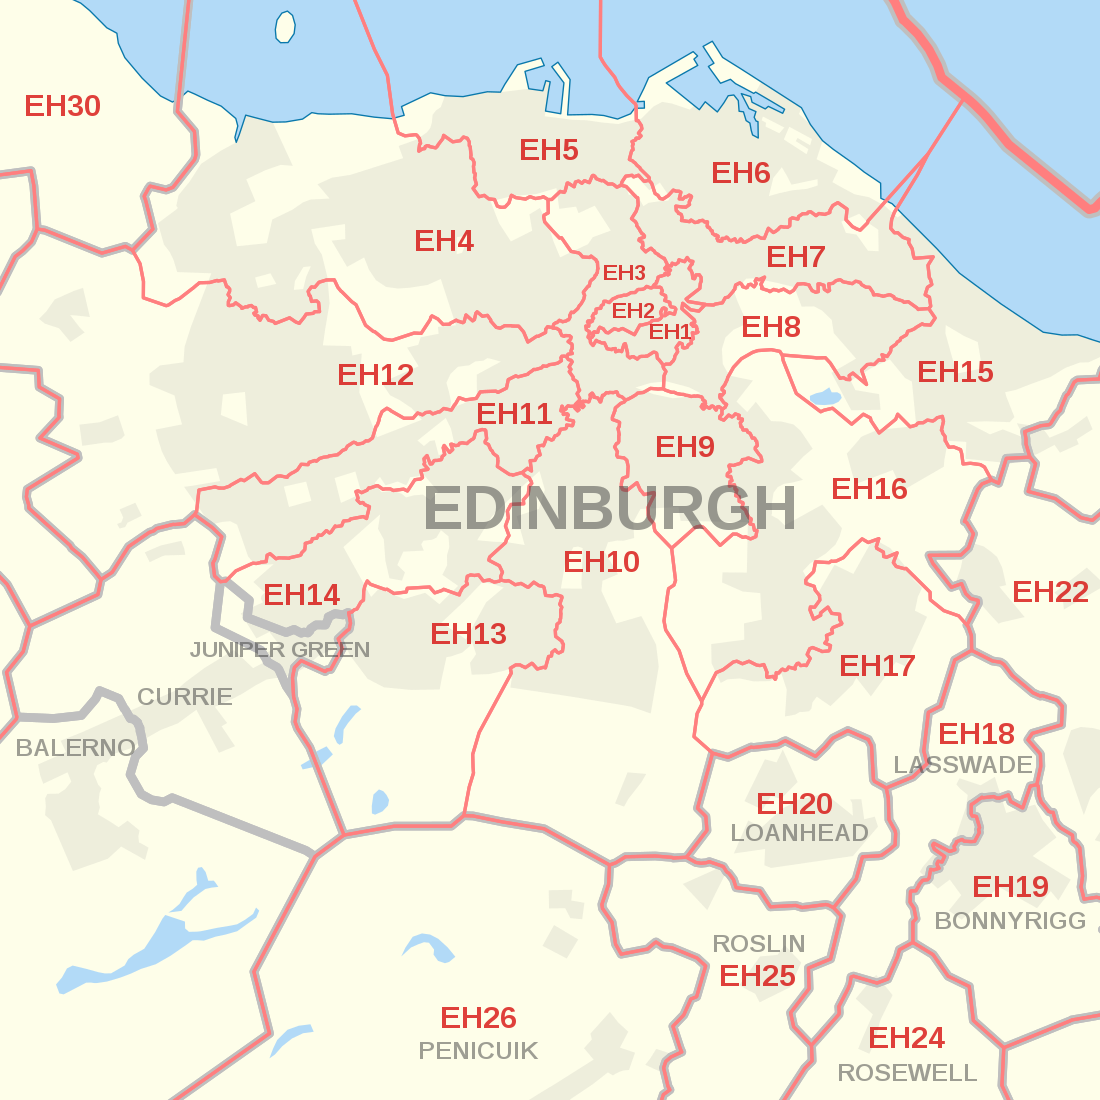 Detailed map of postcode districts and post towns in and around Edinburgh